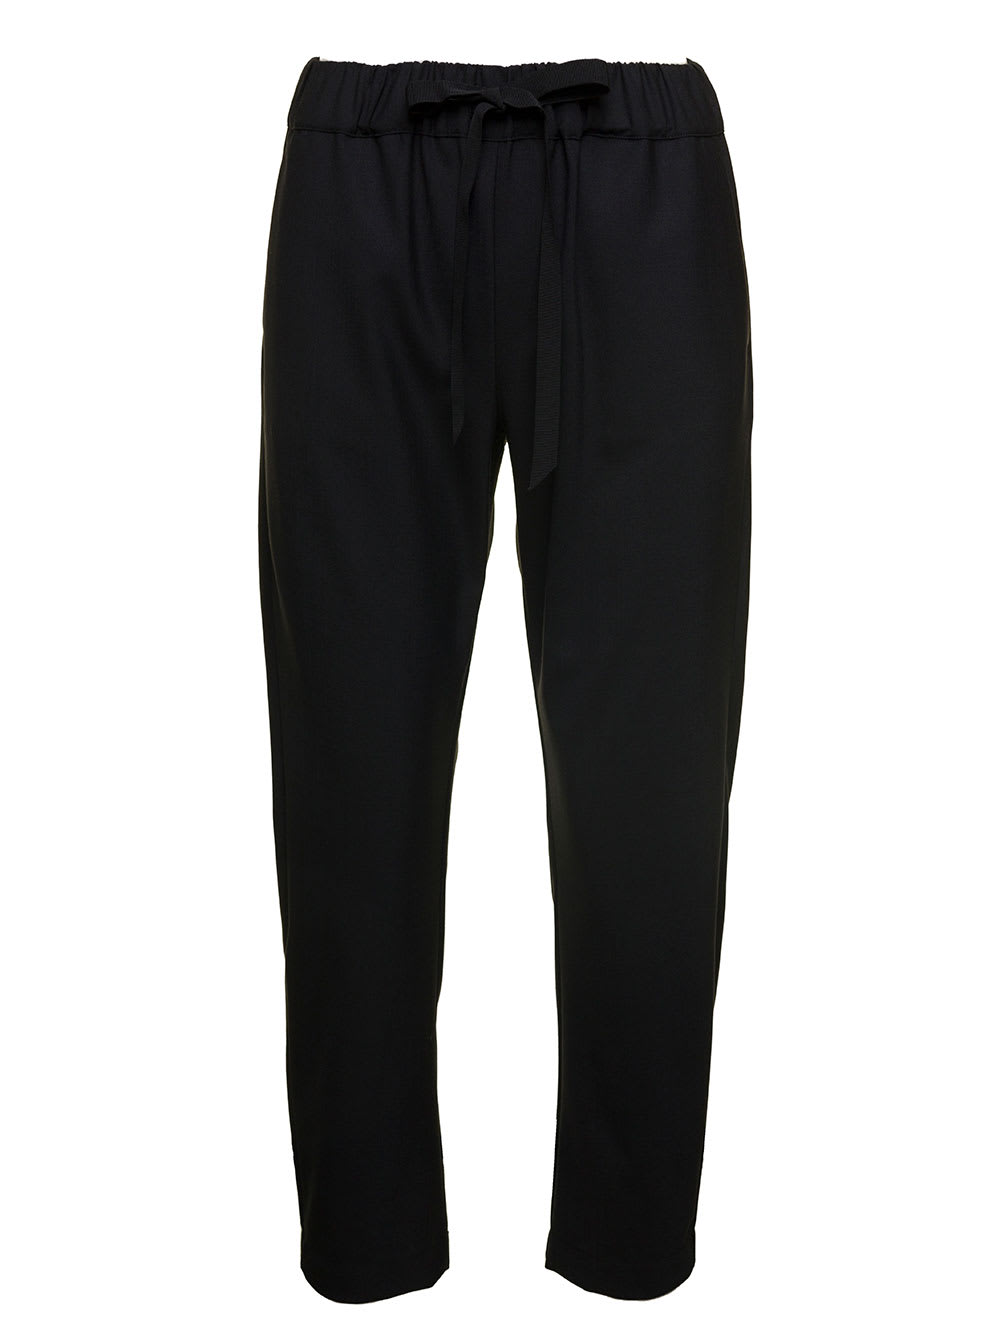 SEMICOUTURE BLACK STRAIGHT PANTS WITH DRAWSTRING IN WOOL STRETCH WOMAN